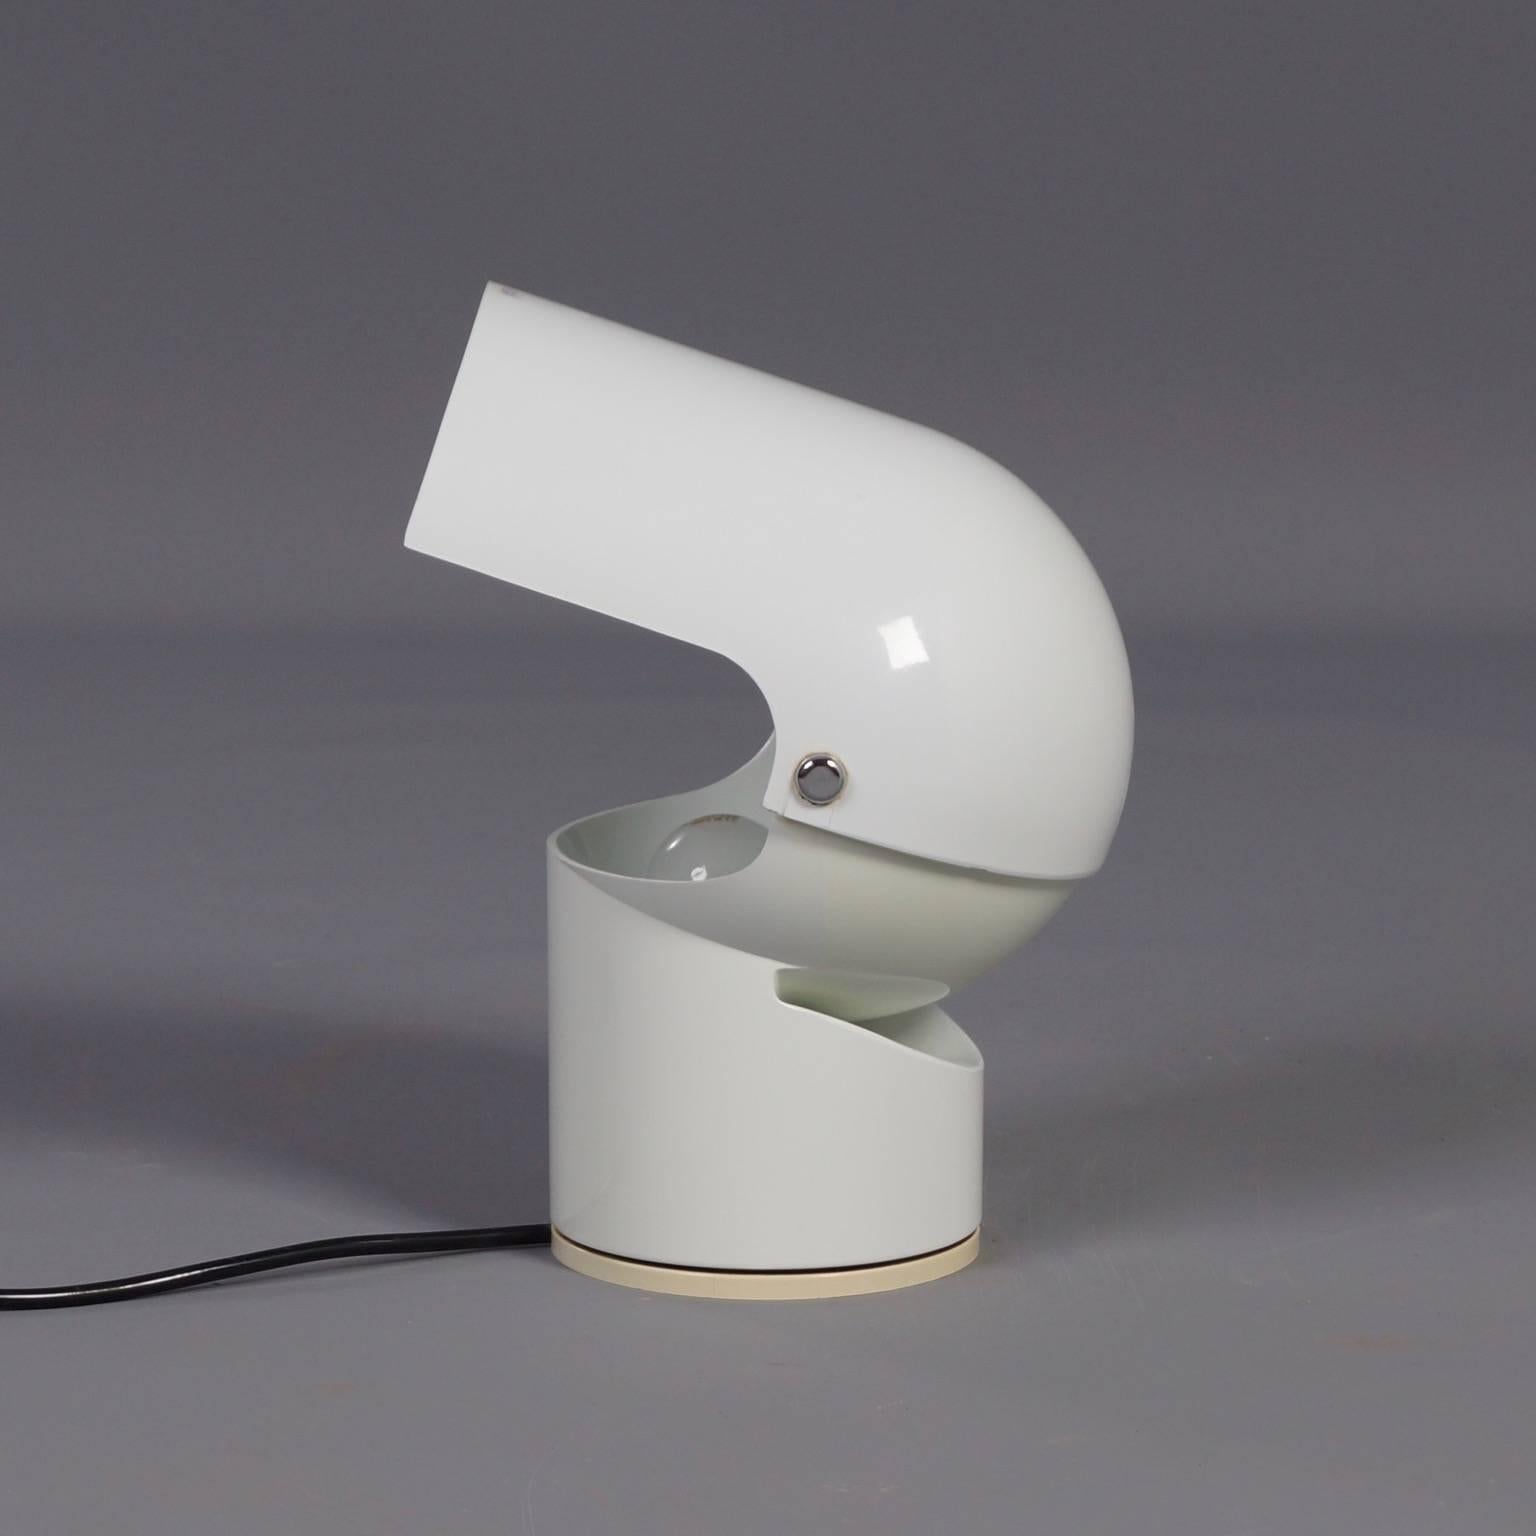 Late 20th Century 'Pileino' Table Lamp by Gae Aulenti for Artemide, 1972